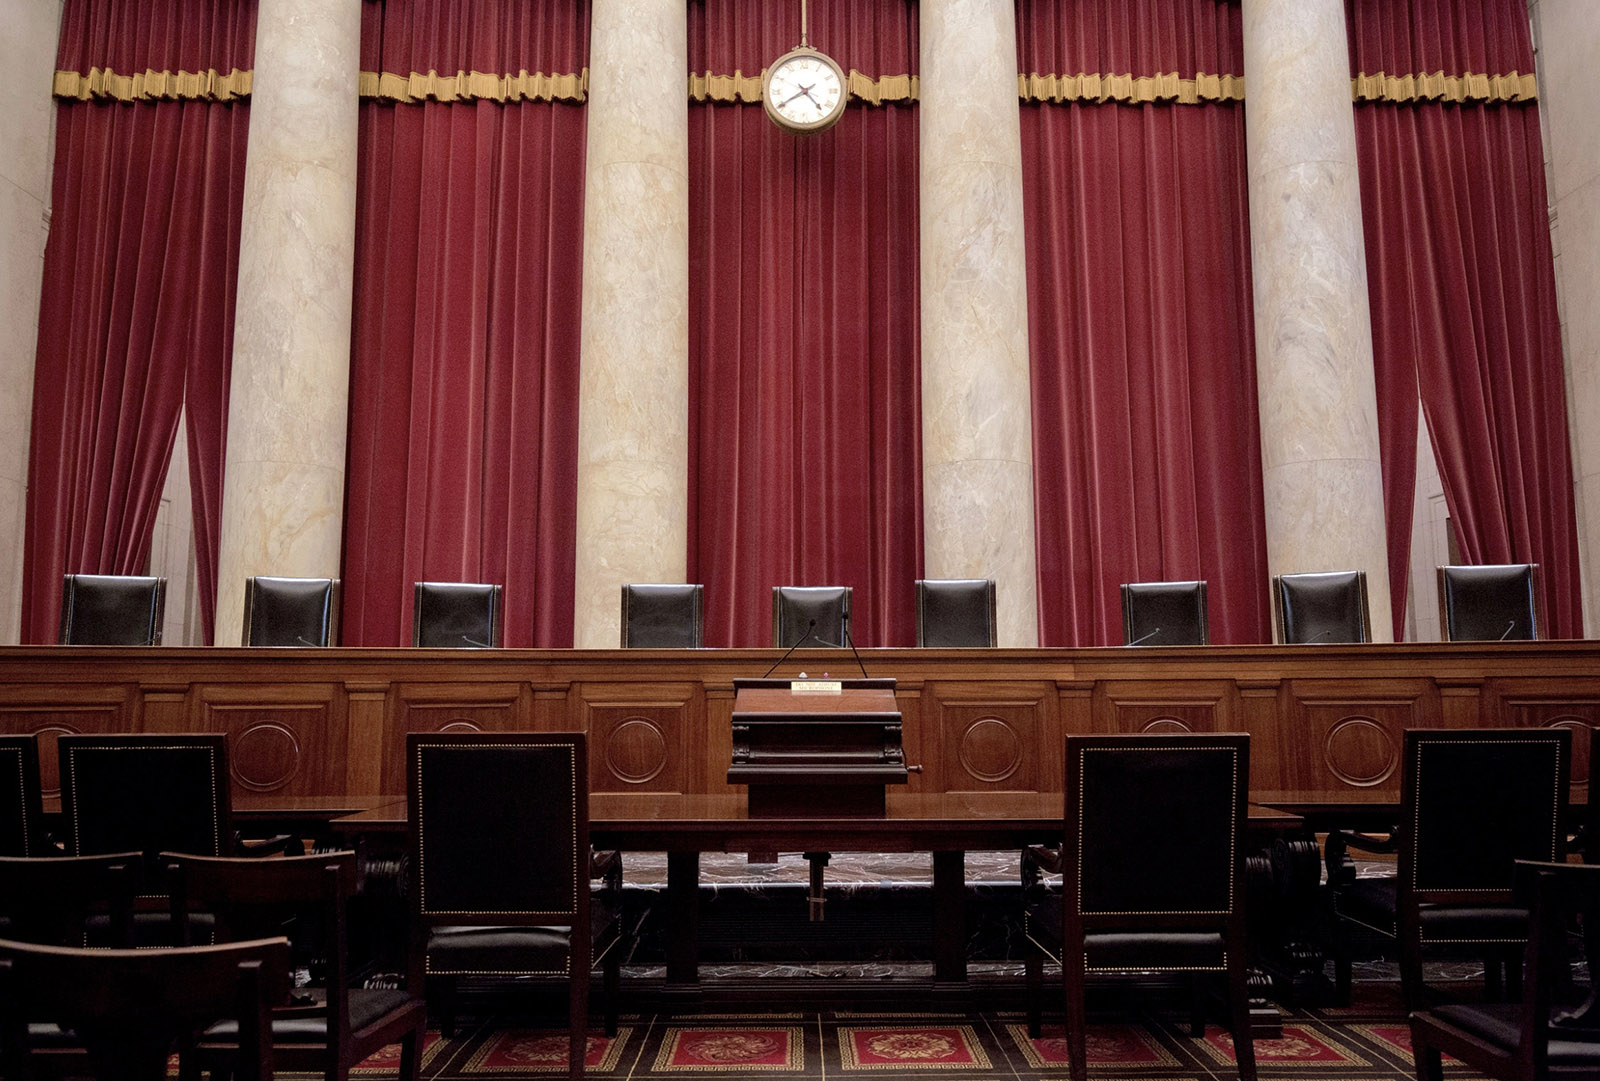 The courtroom facing the bench. Credit: Supreme Court of the United States.